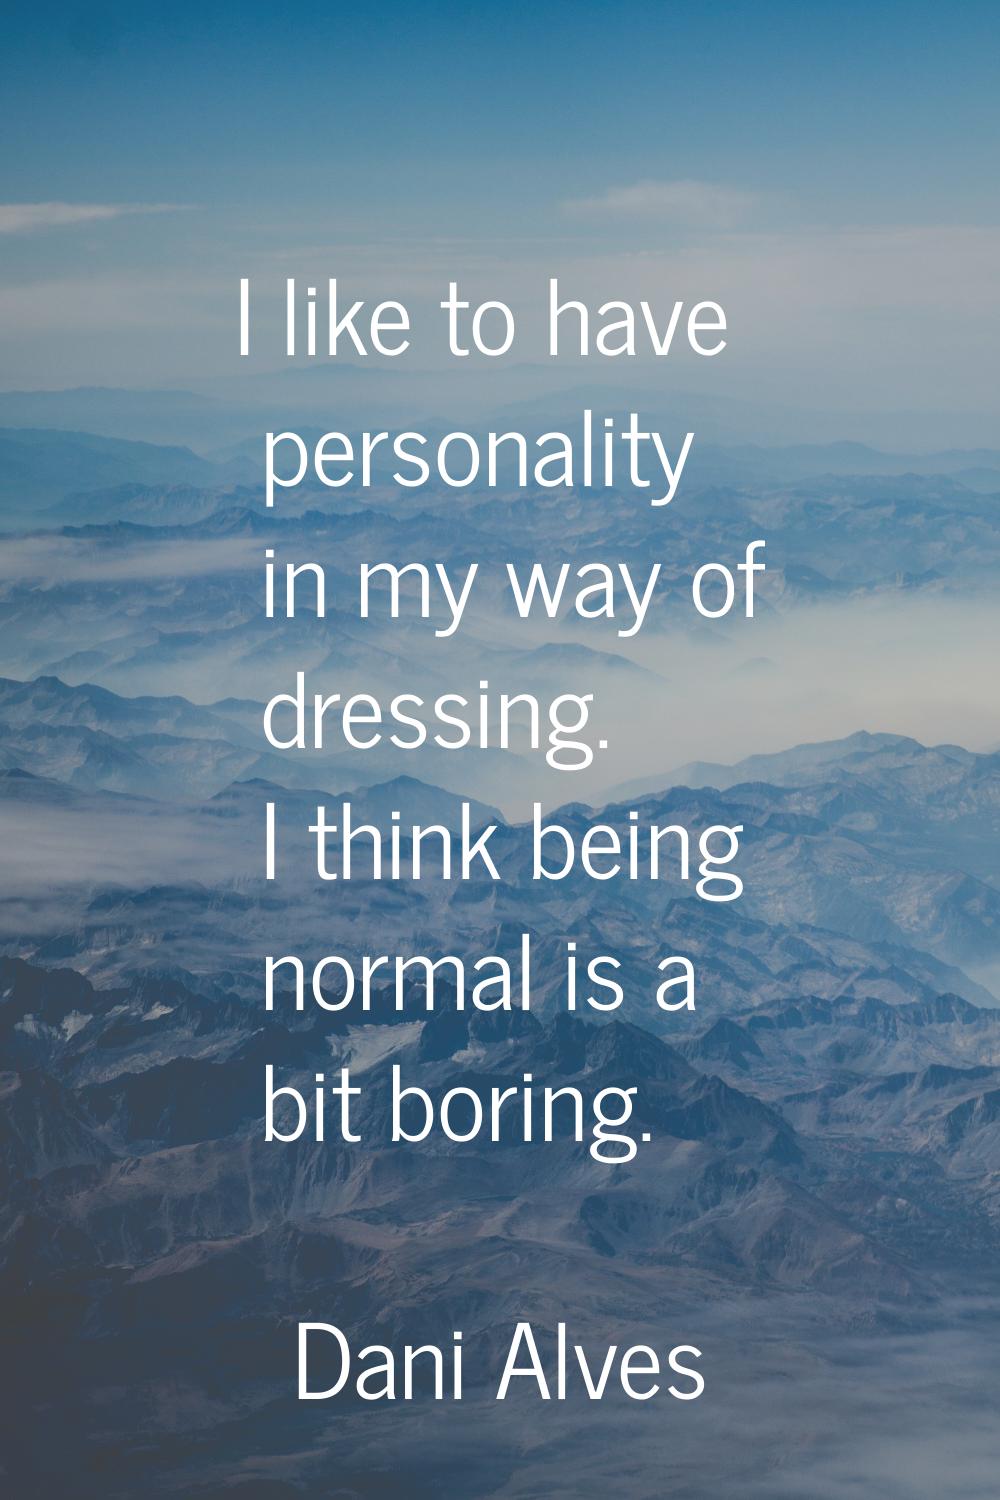 I like to have personality in my way of dressing. I think being normal is a bit boring.